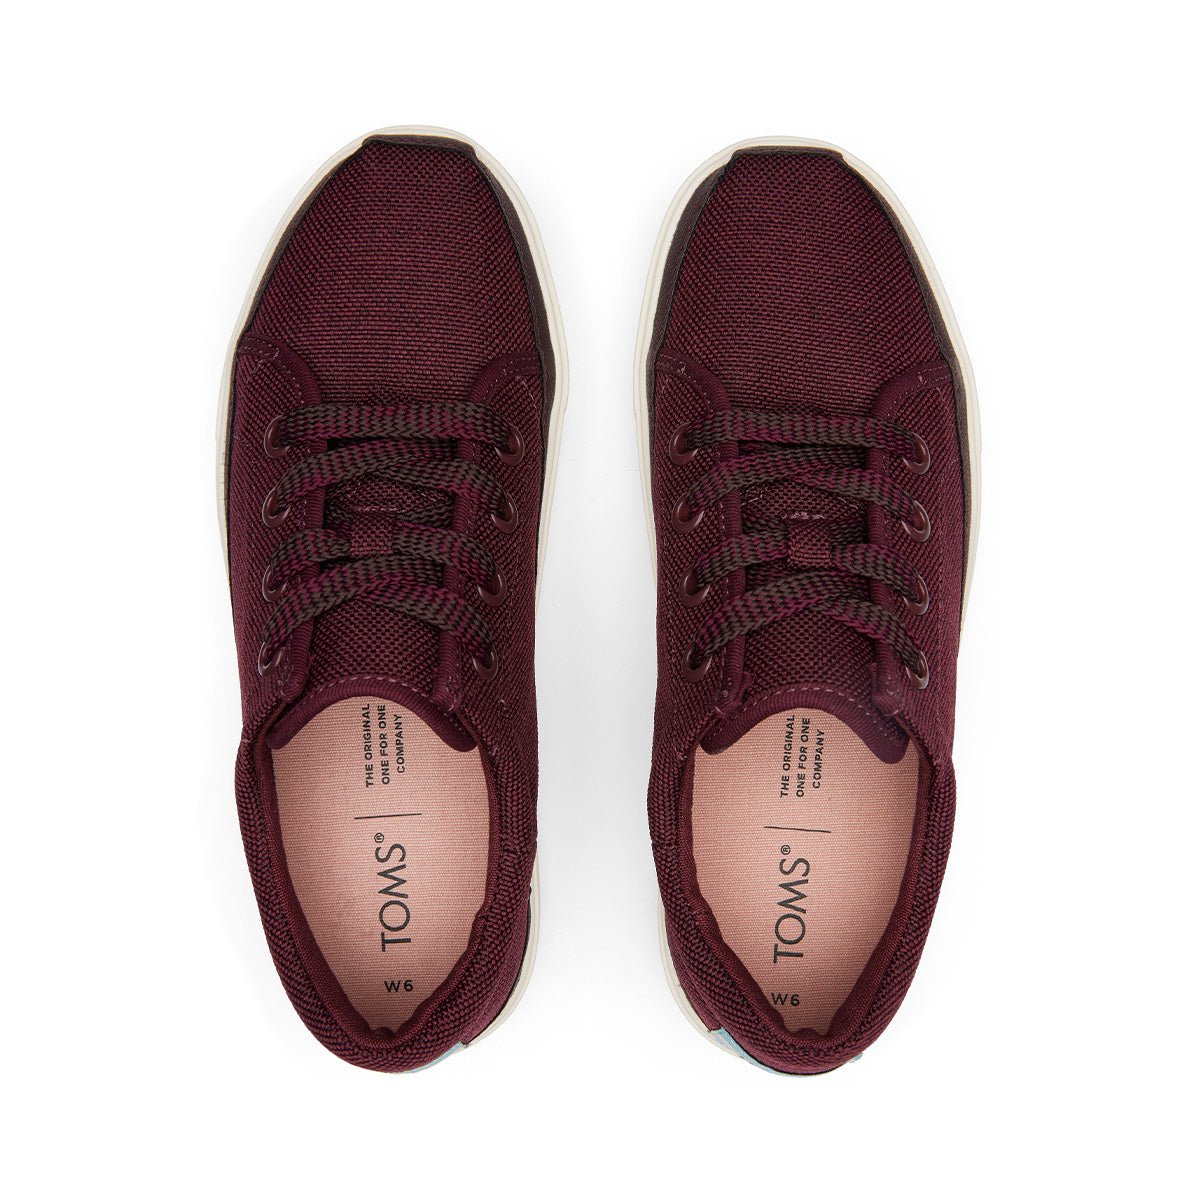 TOMS Sneakers Lace up Lug Women - Burgundy Heavy Canvas